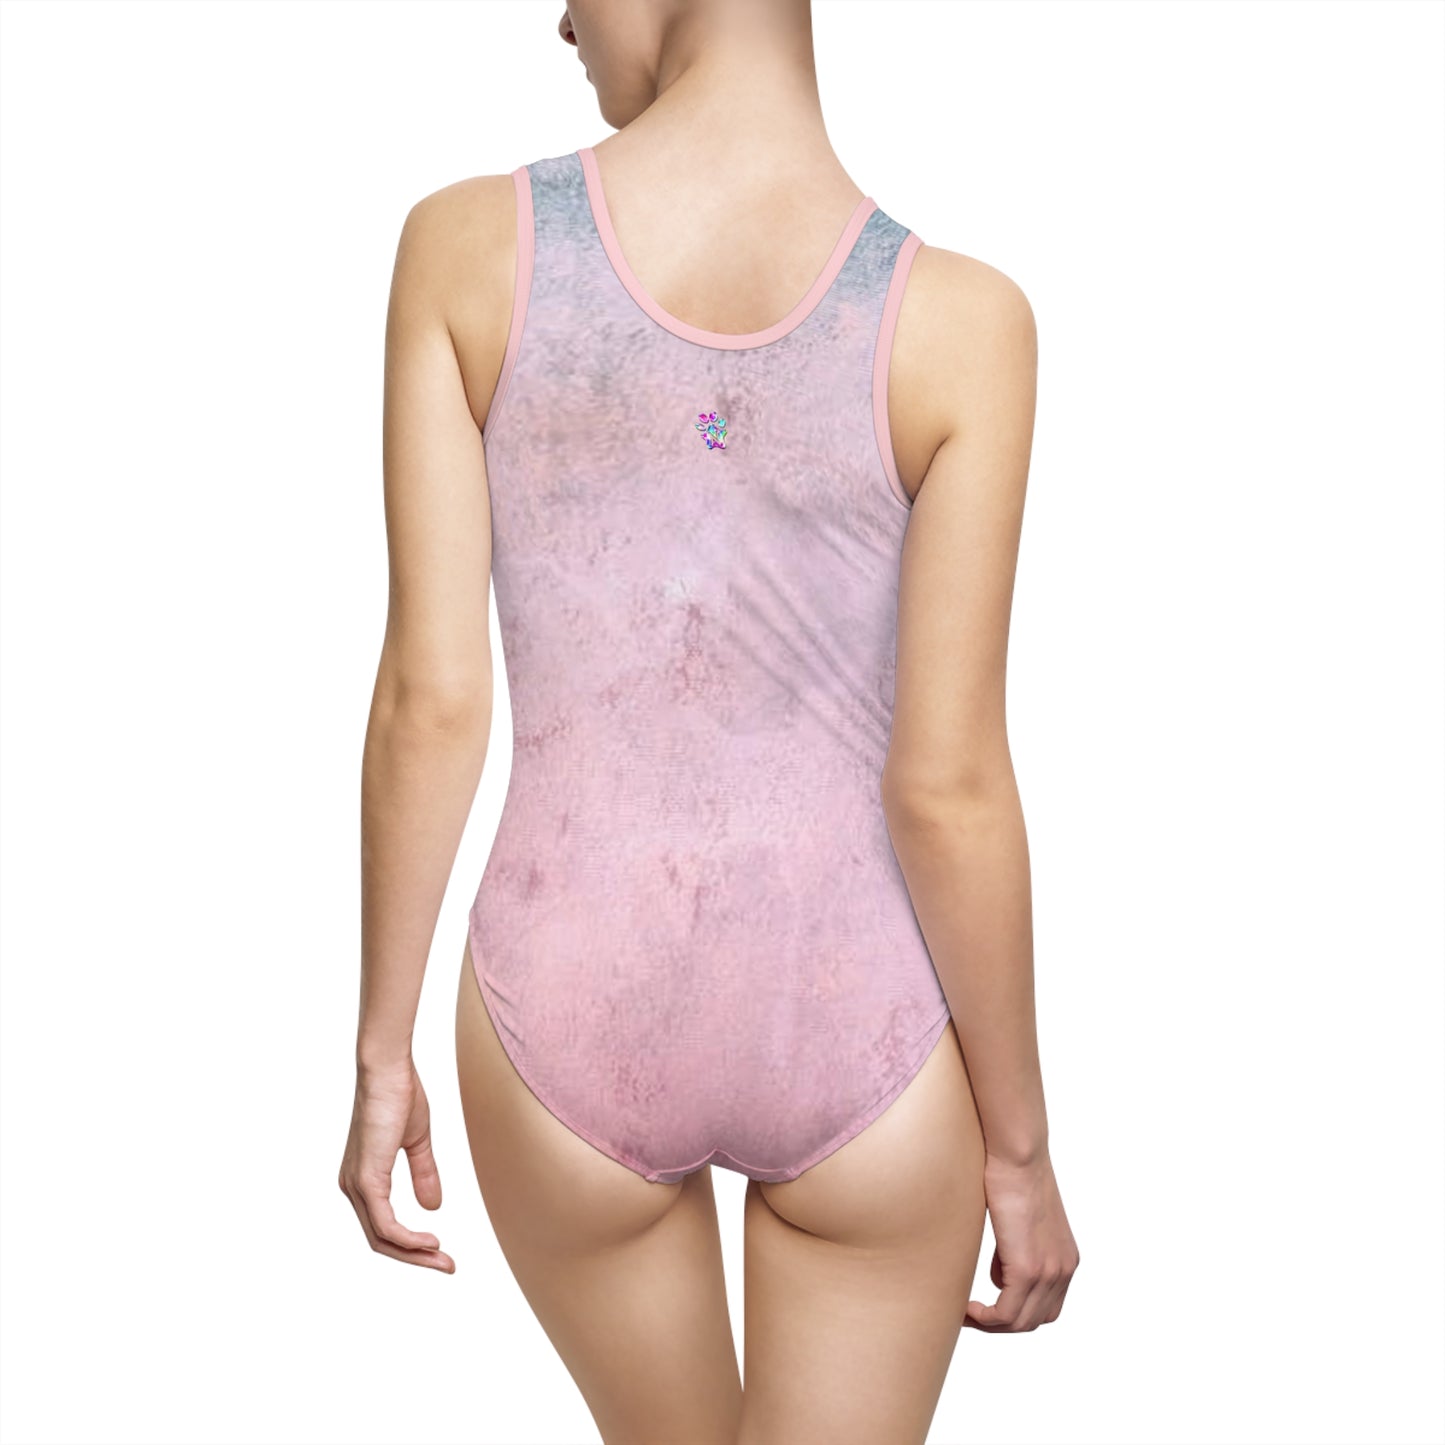 Paw-N-Star Women's Classic One-Piece Swimsuit Pink Granite